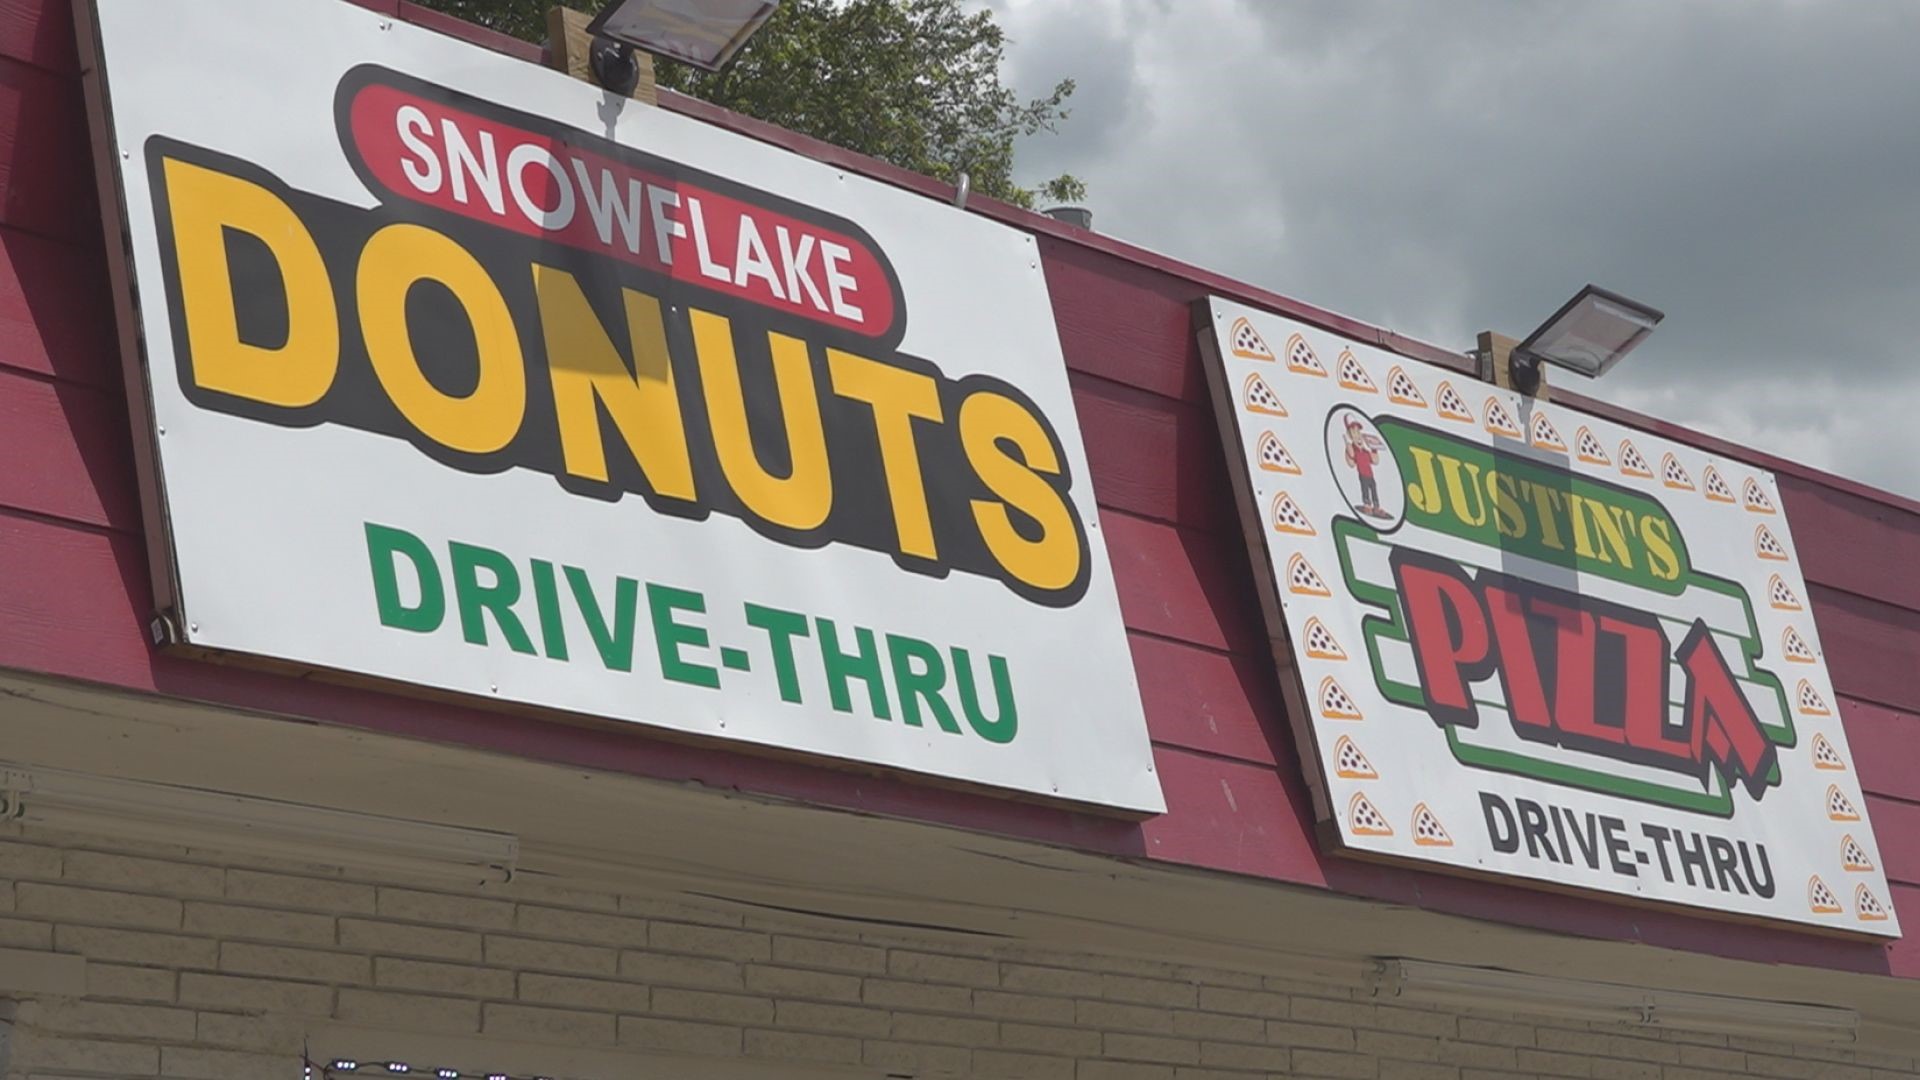 The owners offer different foods like donuts, kolaches, pizza and iced coffee.